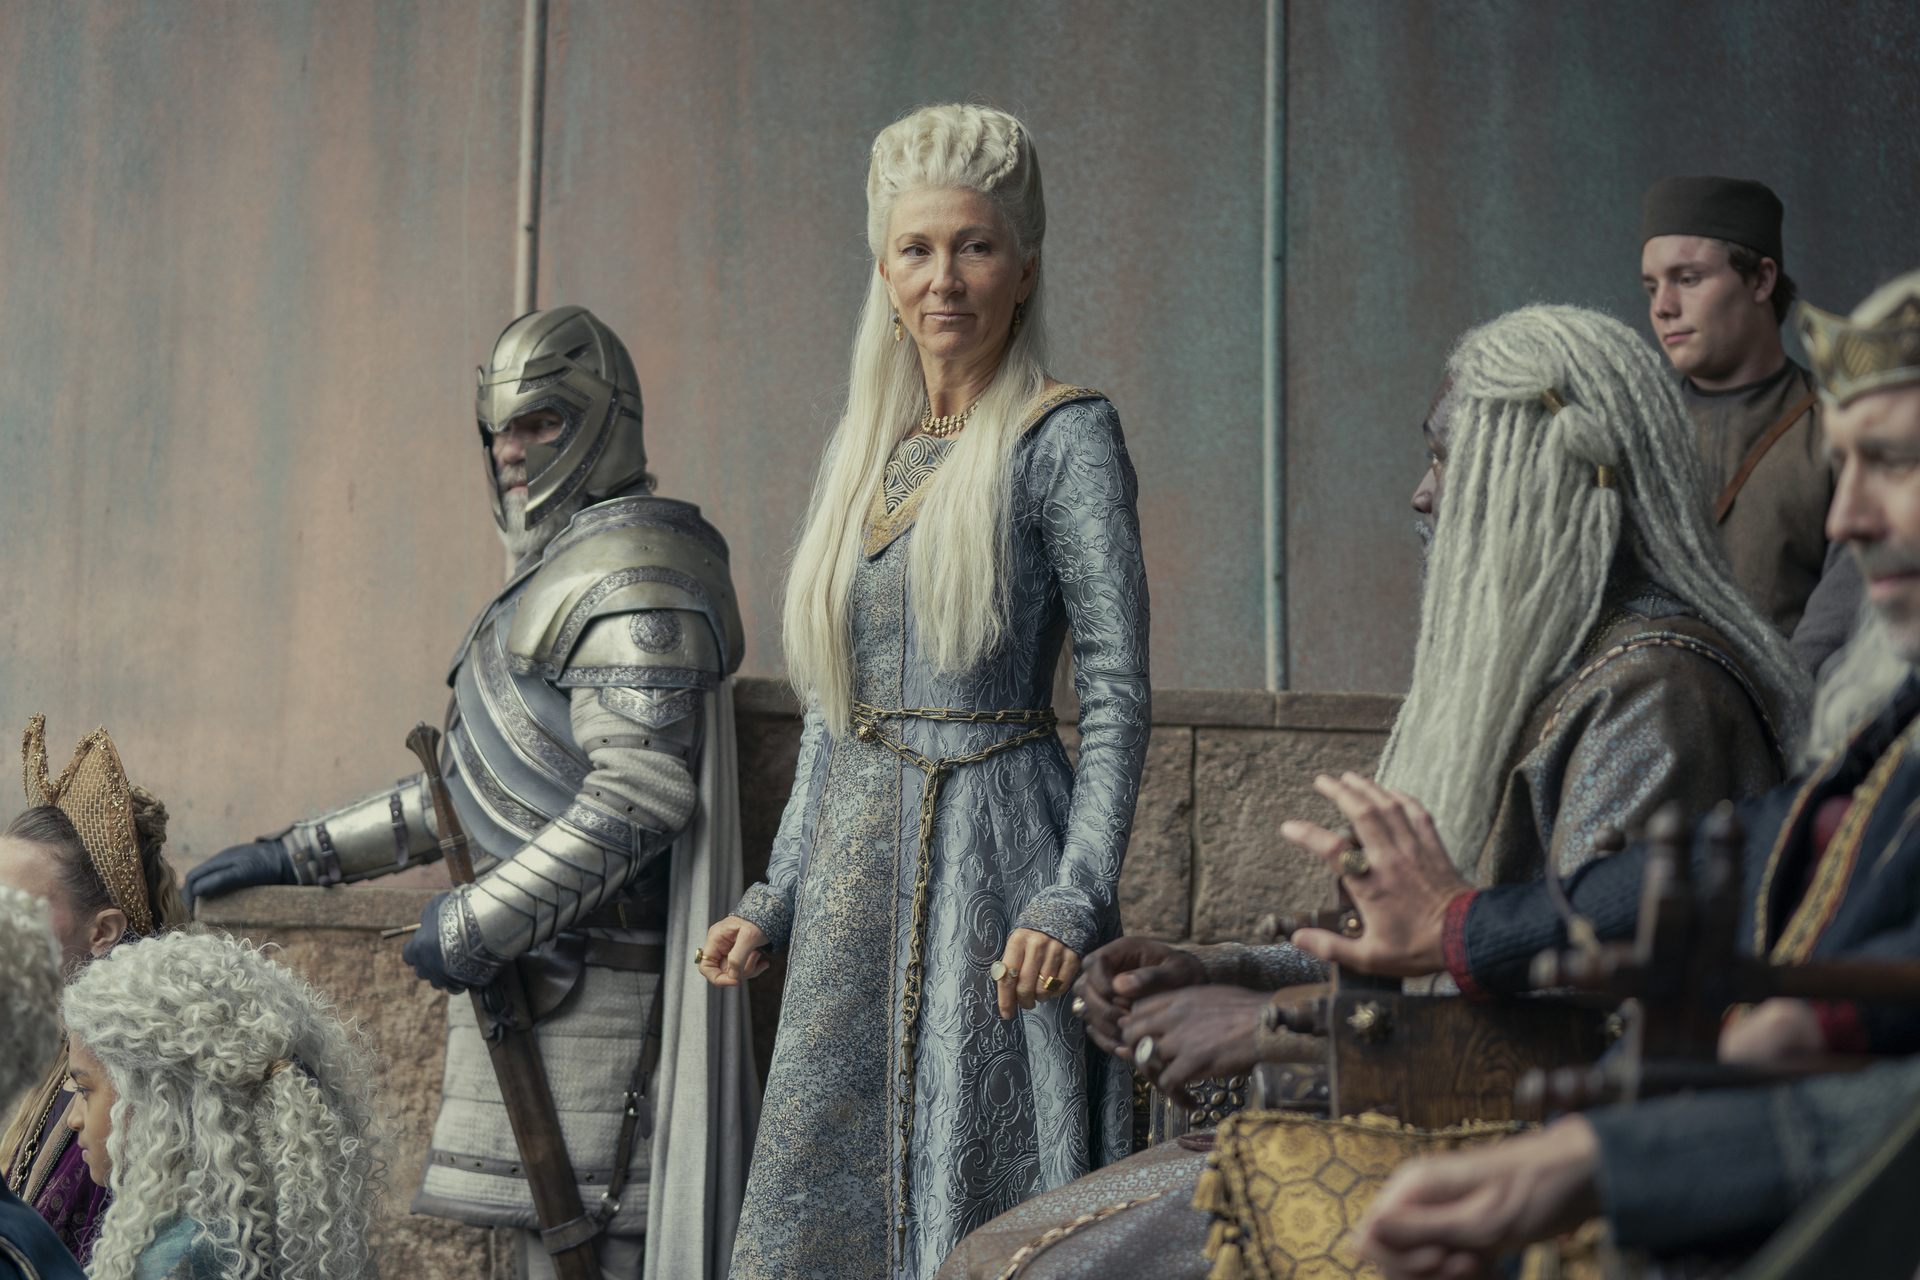 Eve Best asRhaenys Targaryen in House of the Dragon. Image: courtesy of Warner Brothers